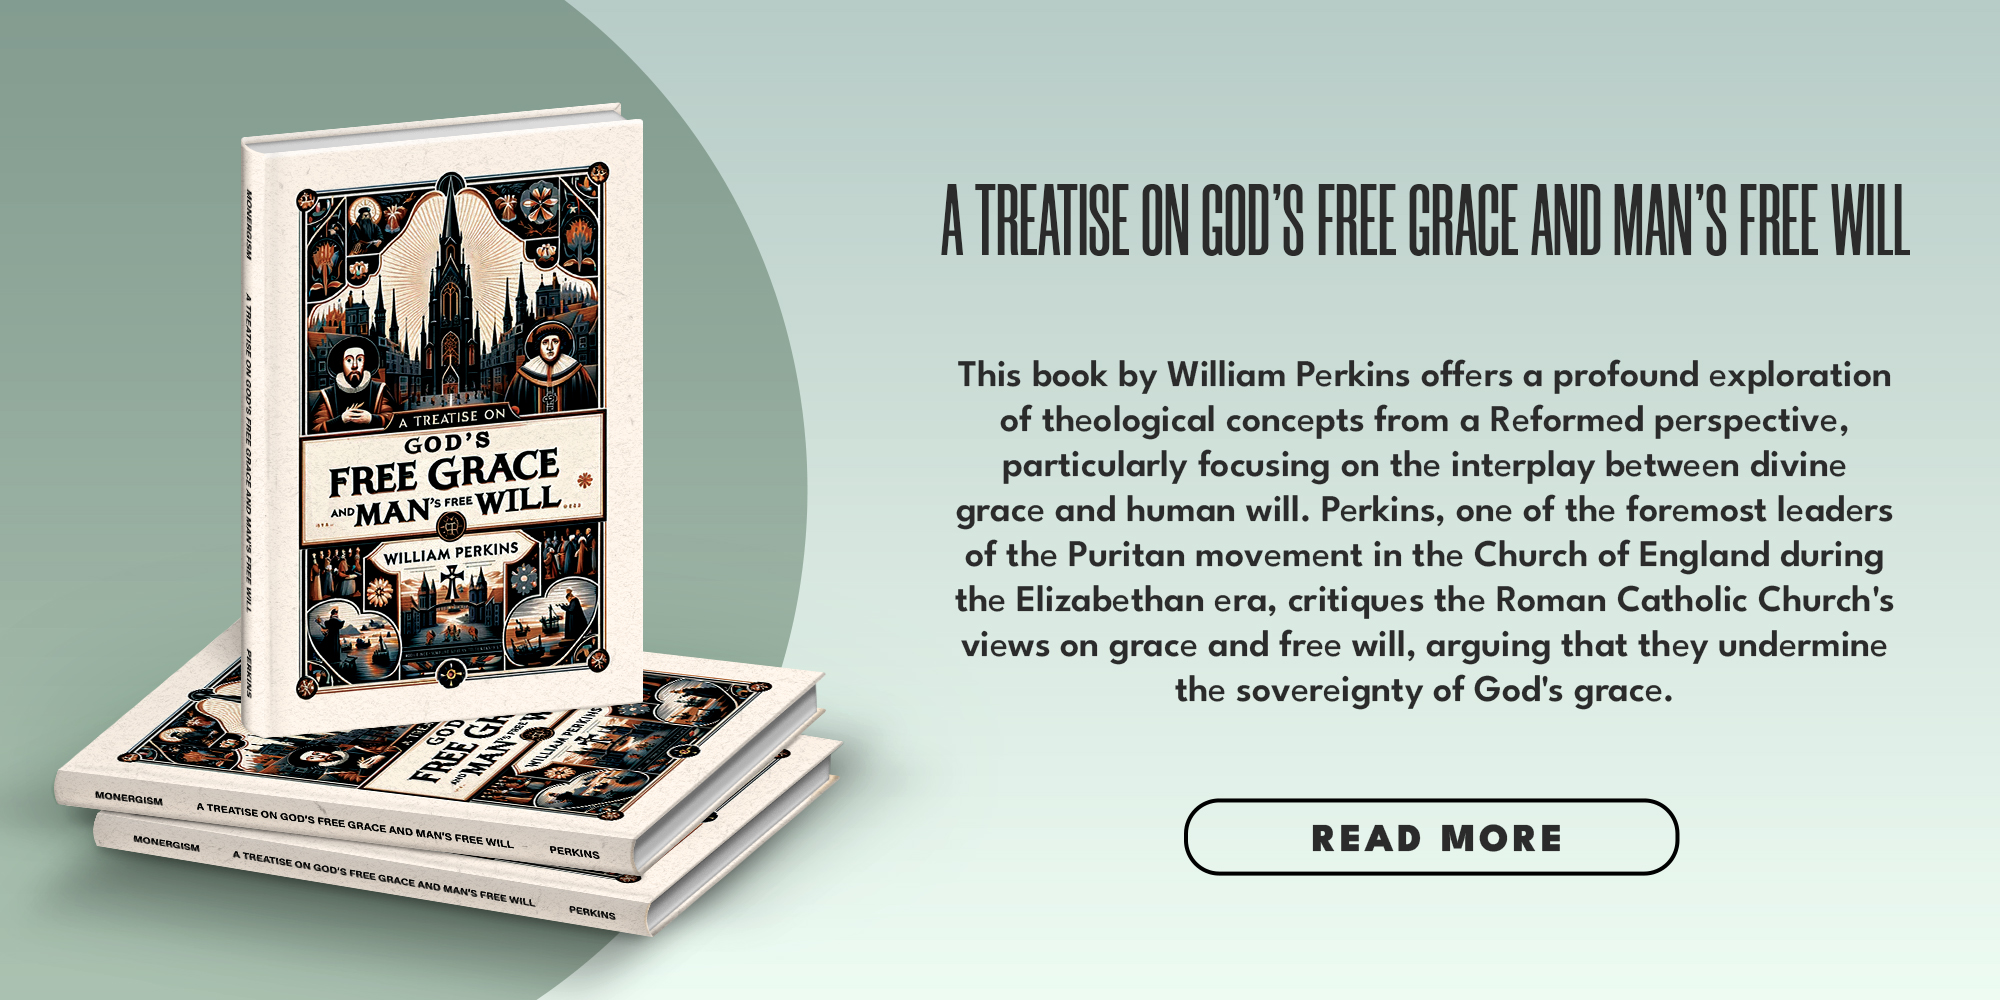 A Treatise on God's Free Grace and Man's Free Will